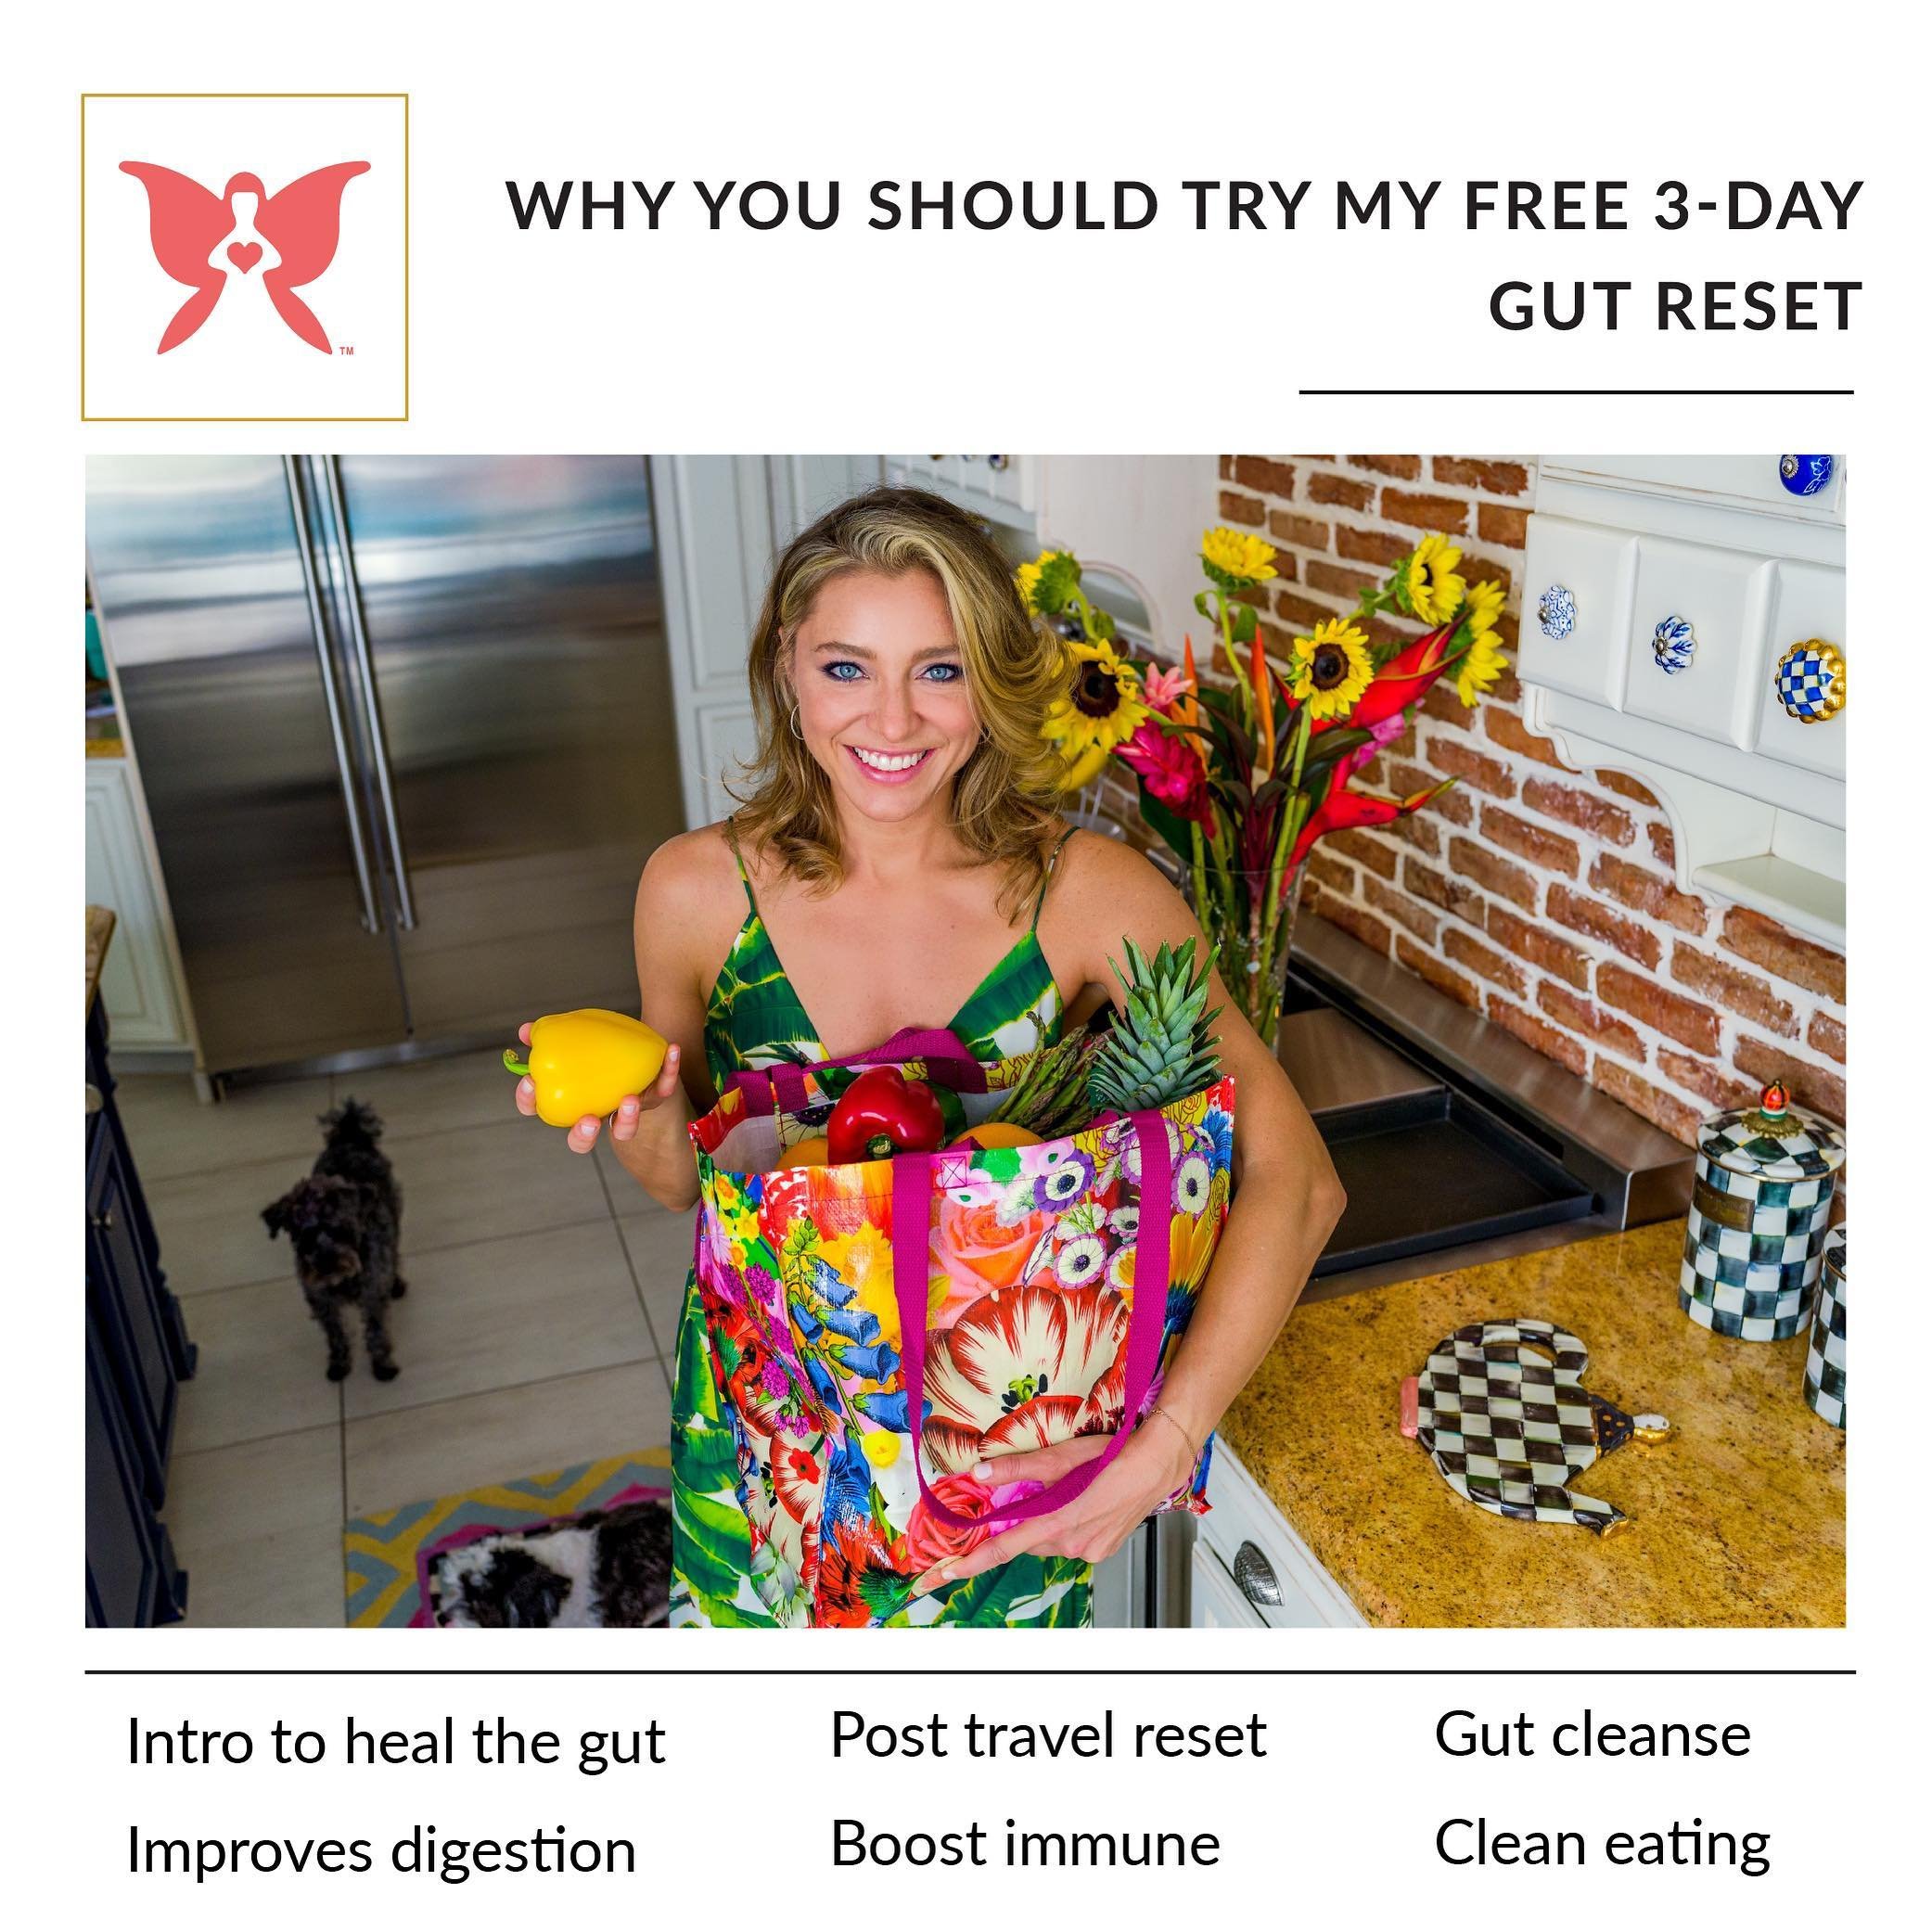 My FREE 3-Day Gut Reset is available for download via the link in my profile. It&rsquo;s all about consuming more cooked foods, blended soups, broths, smoothies, and fresh juices, all foods that are much easier on the gut to digest, give the gut a bi